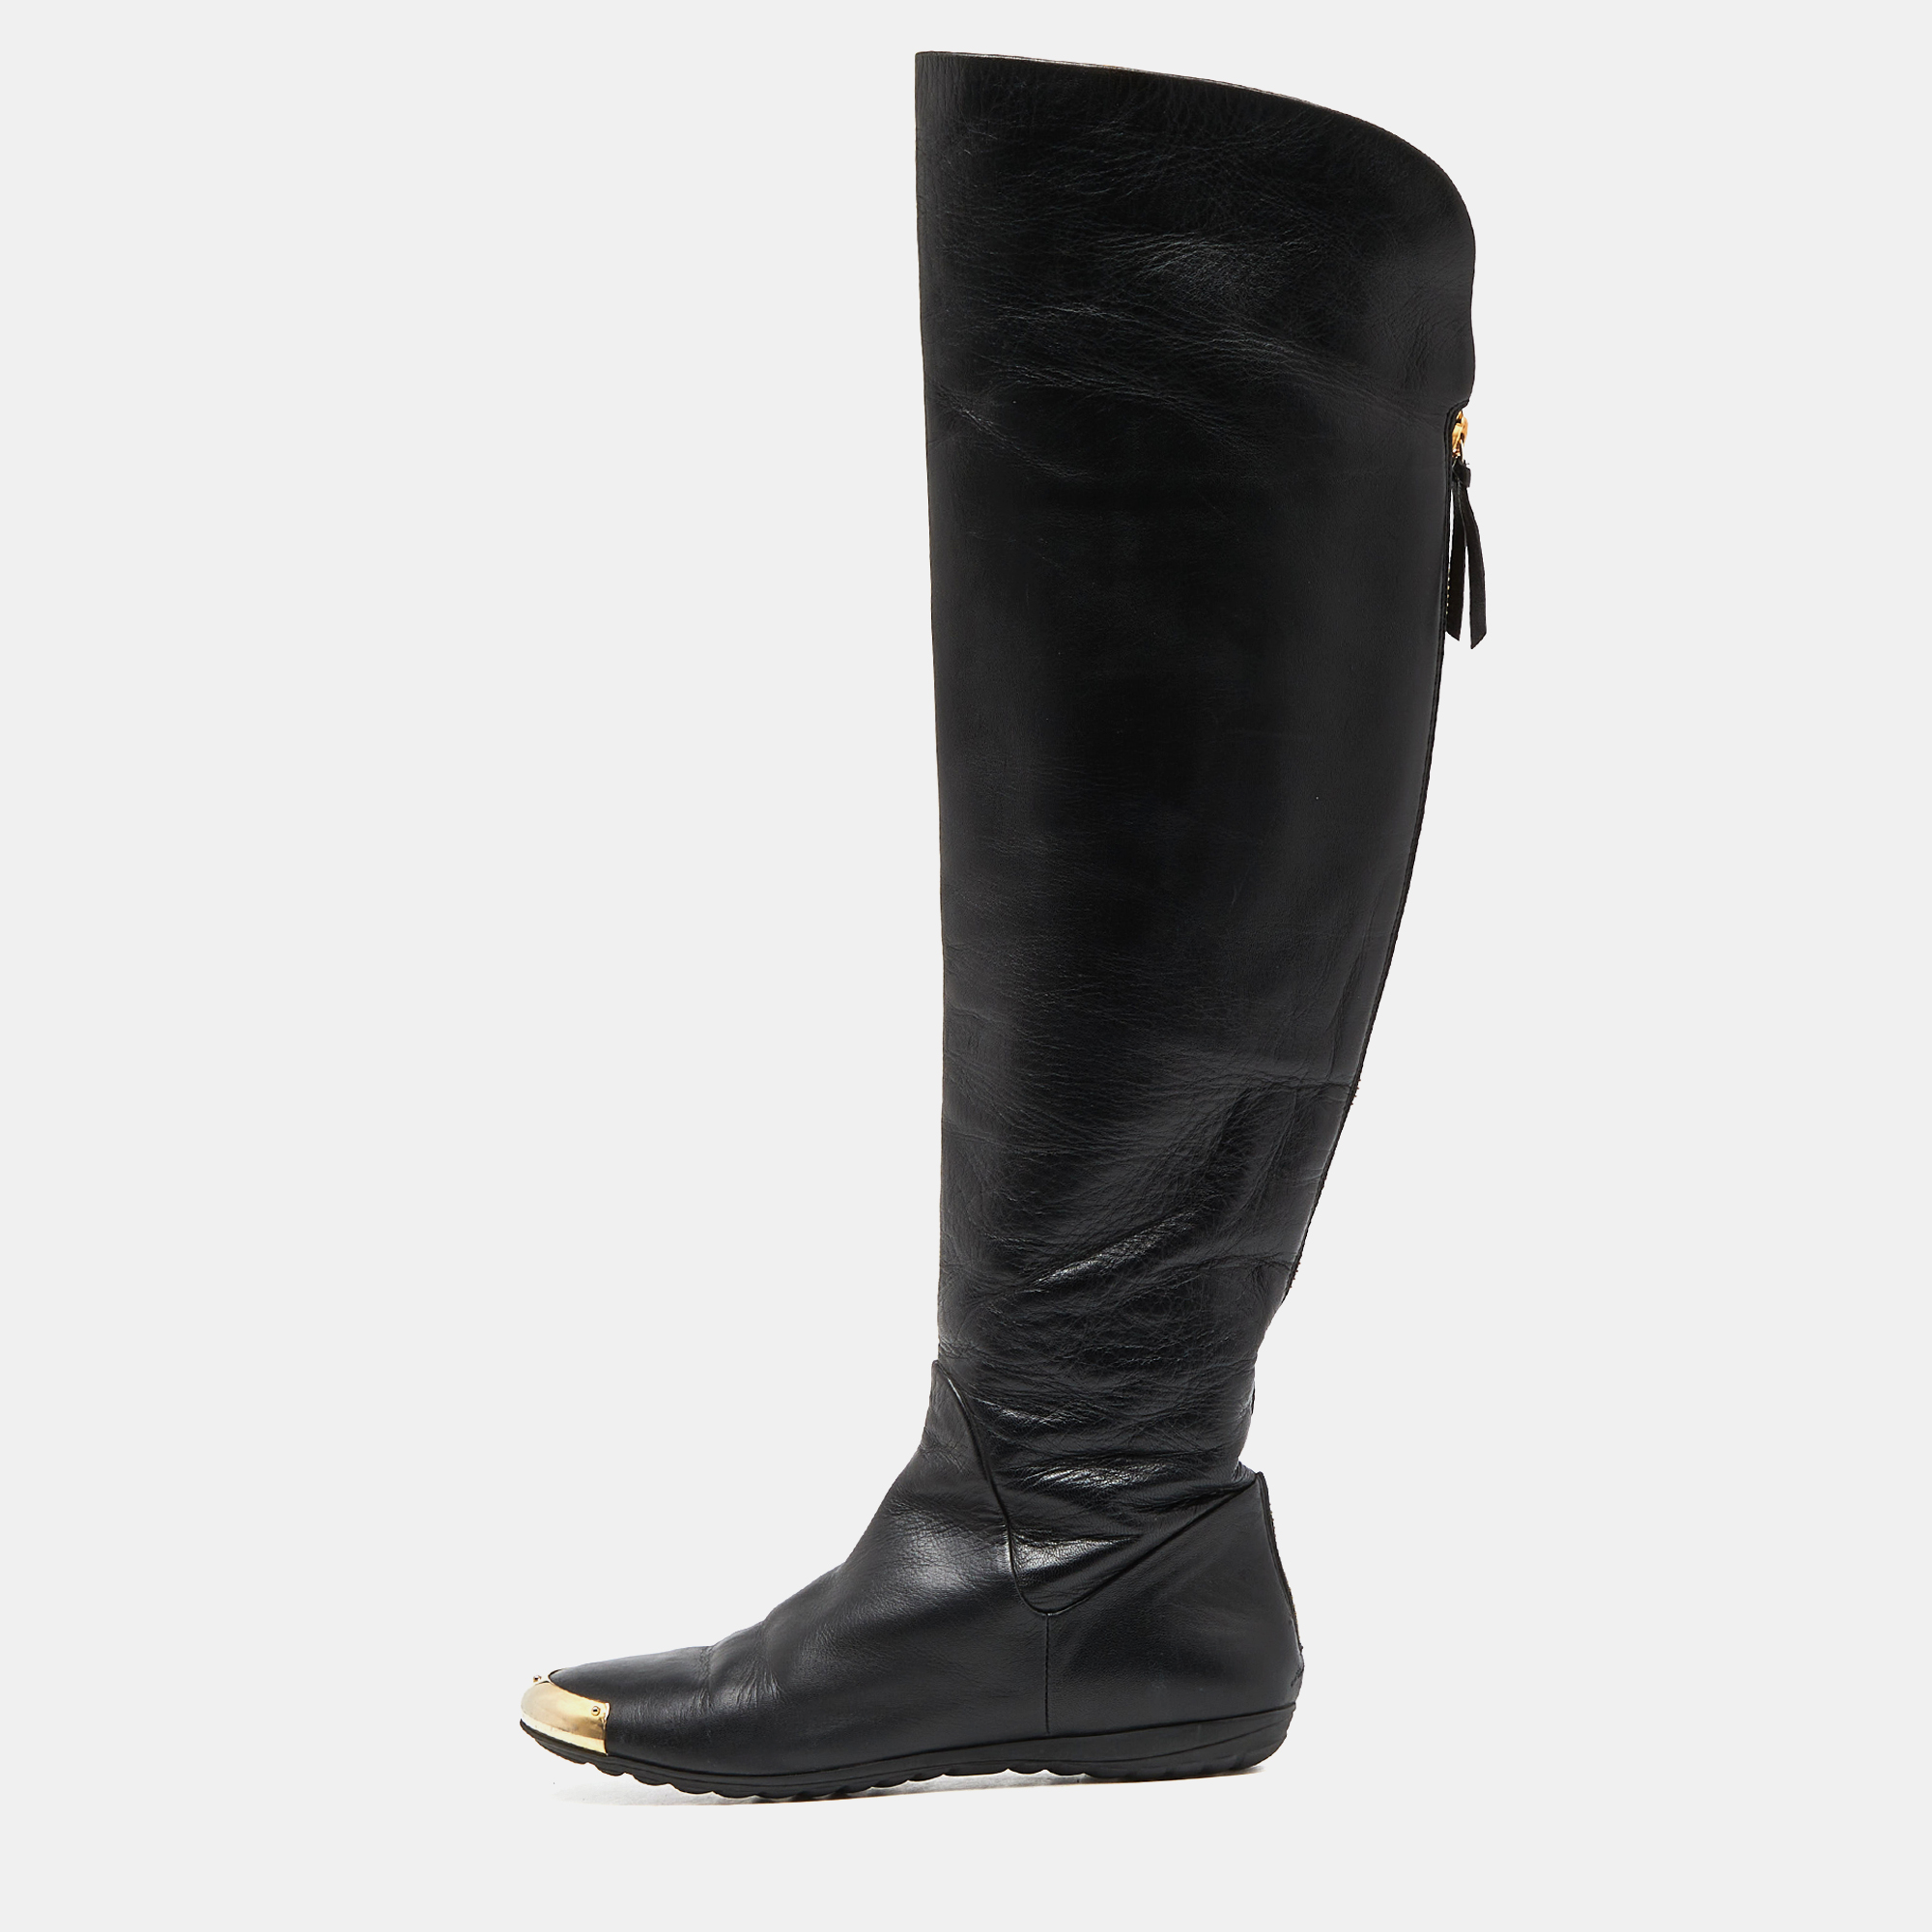 Black Leather Over The Knee Length Boots